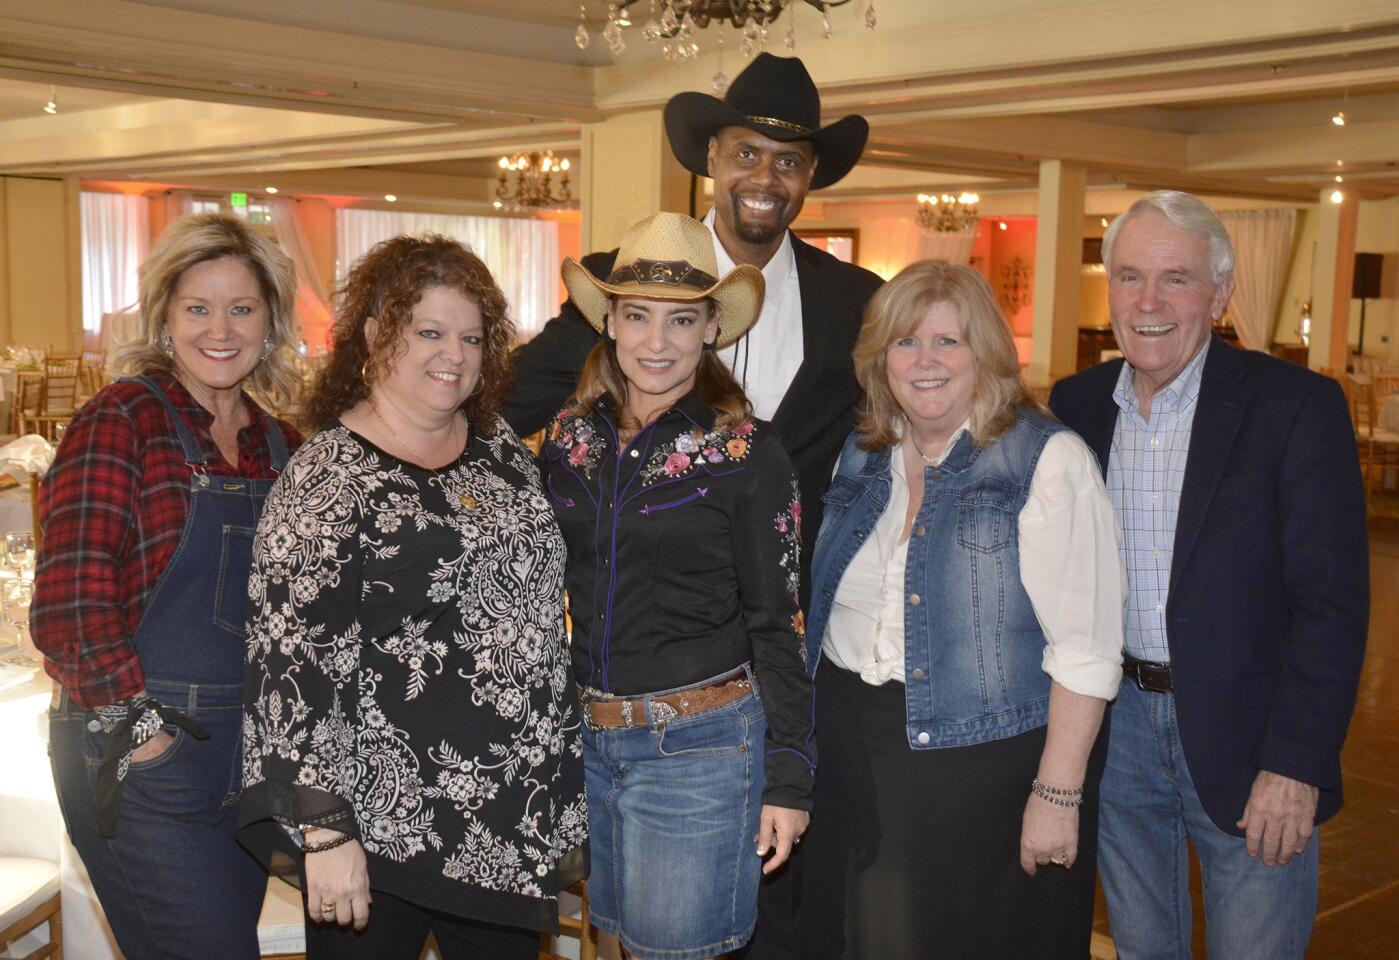 Ready to "Saddle Up" for an evening of fun and fundraising are Chris Miller, from left, Vickie Beckett, Gema Sanchez, Carlton Zapp who provided the evening's entertainment, Karen Volpei-Gussow and Tom Flavin.